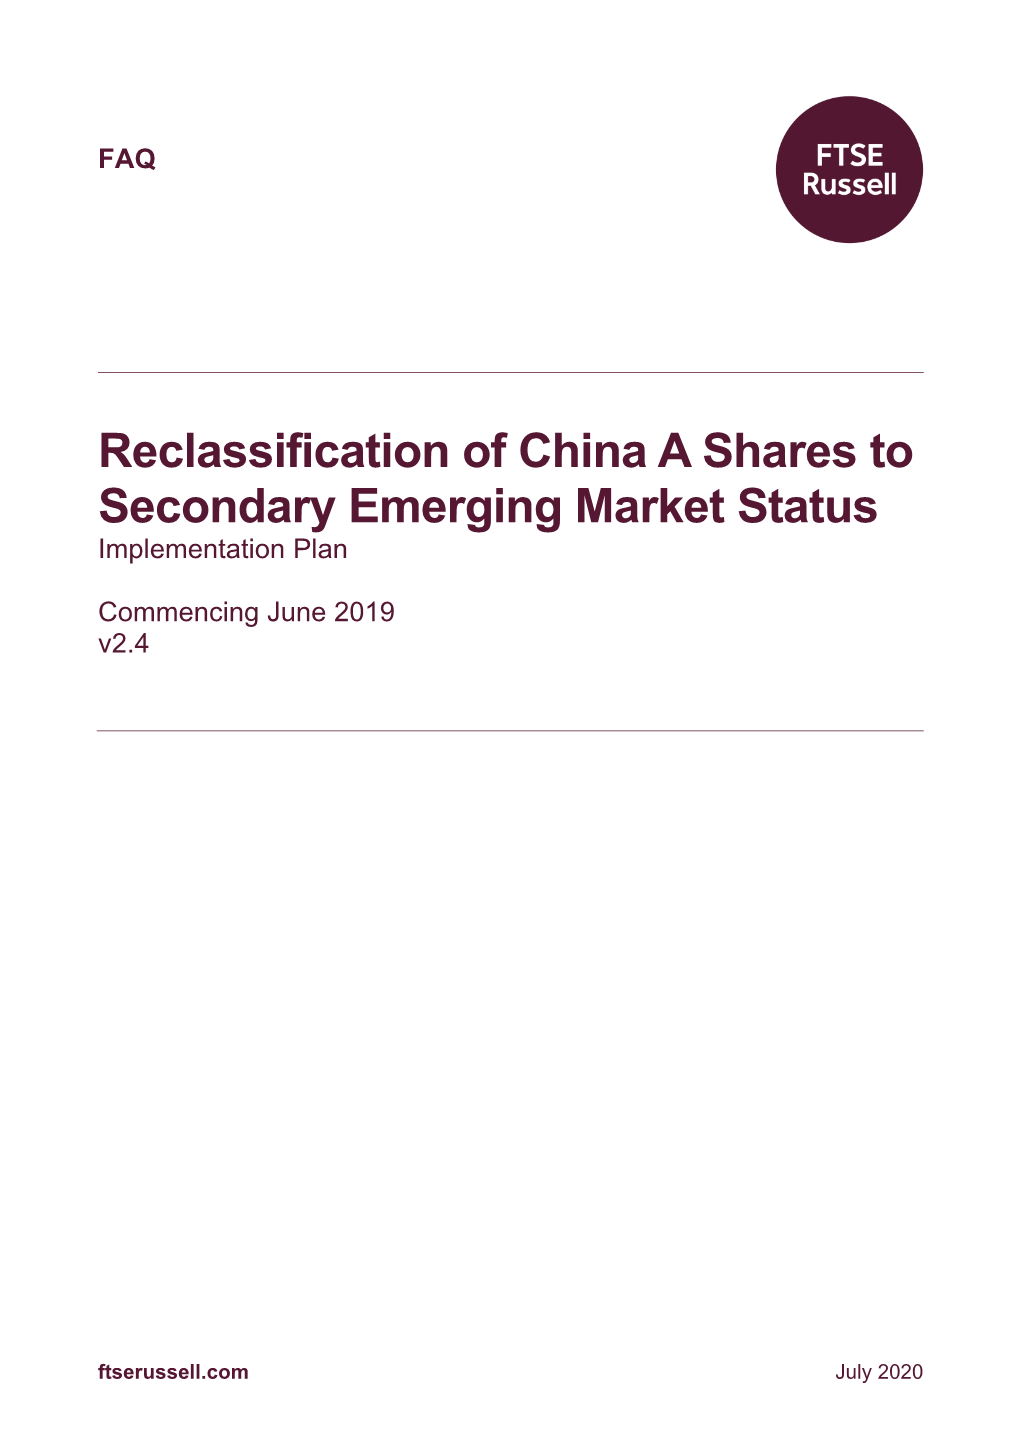 China a Shares to Secondary Emerging Market Status Implementation Plan